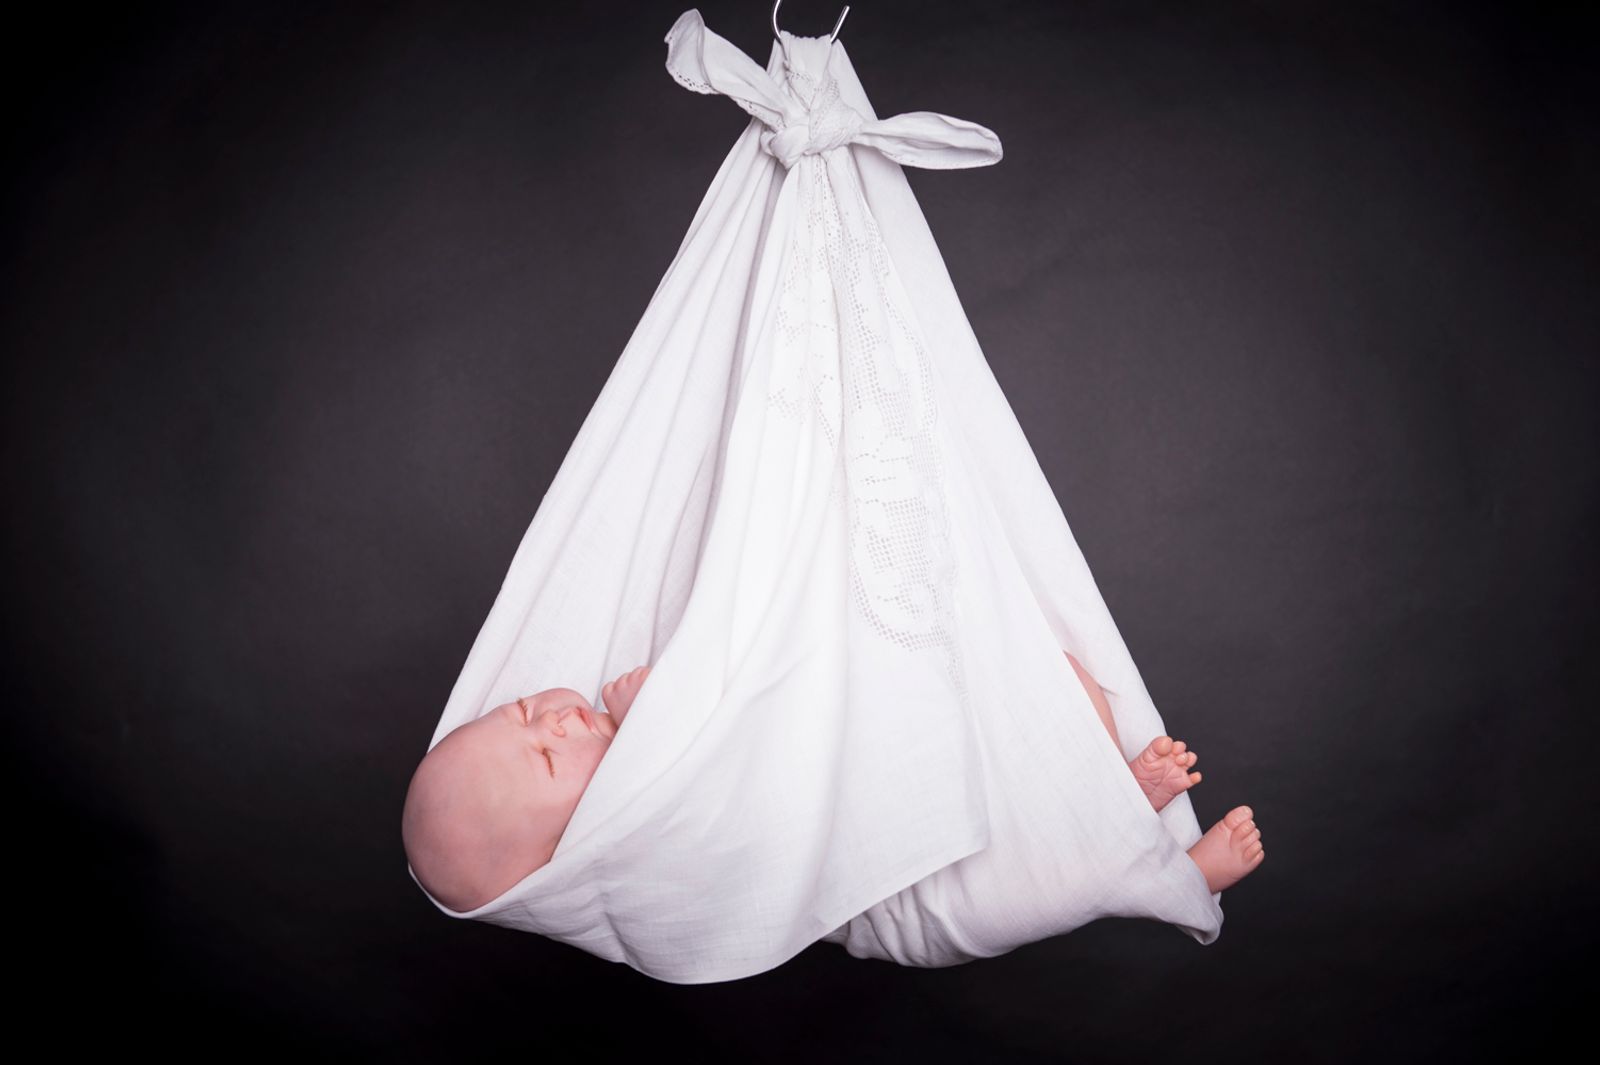 © Emanuela Colombo - Image from the My Special Baby photography project